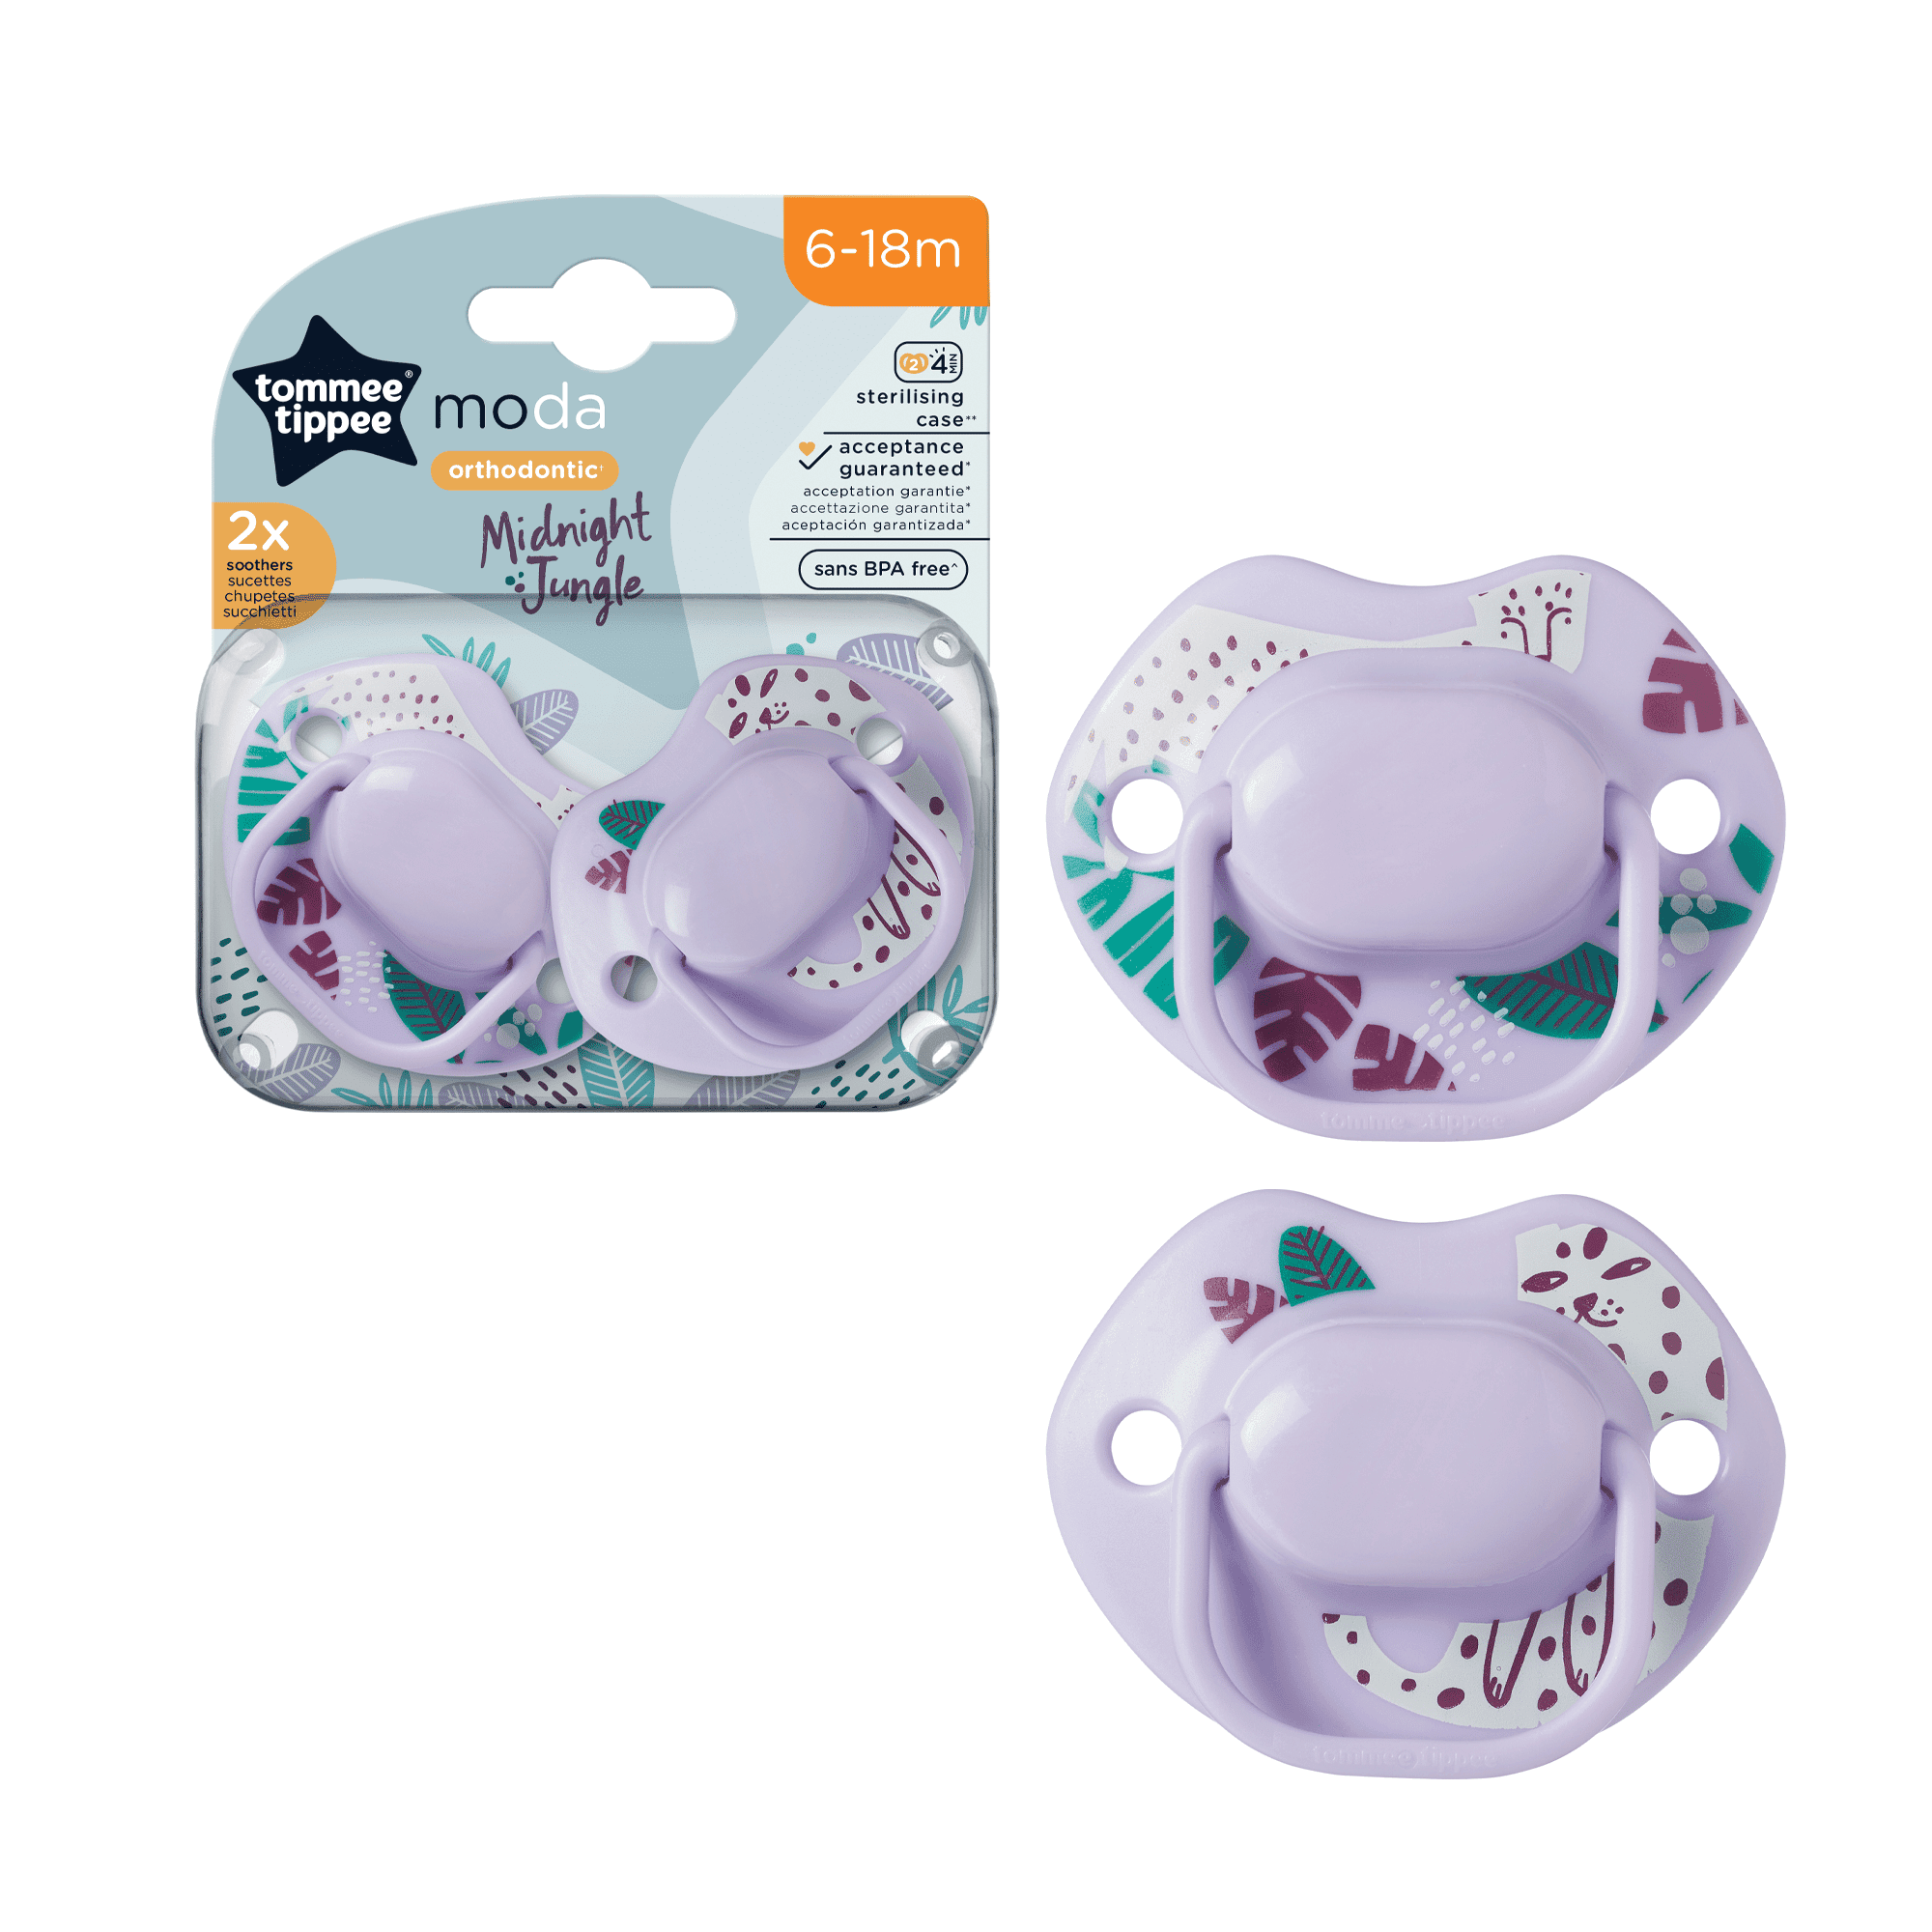 Sucette Fun 6-18m Tomme Tippee - Tommee Tippee